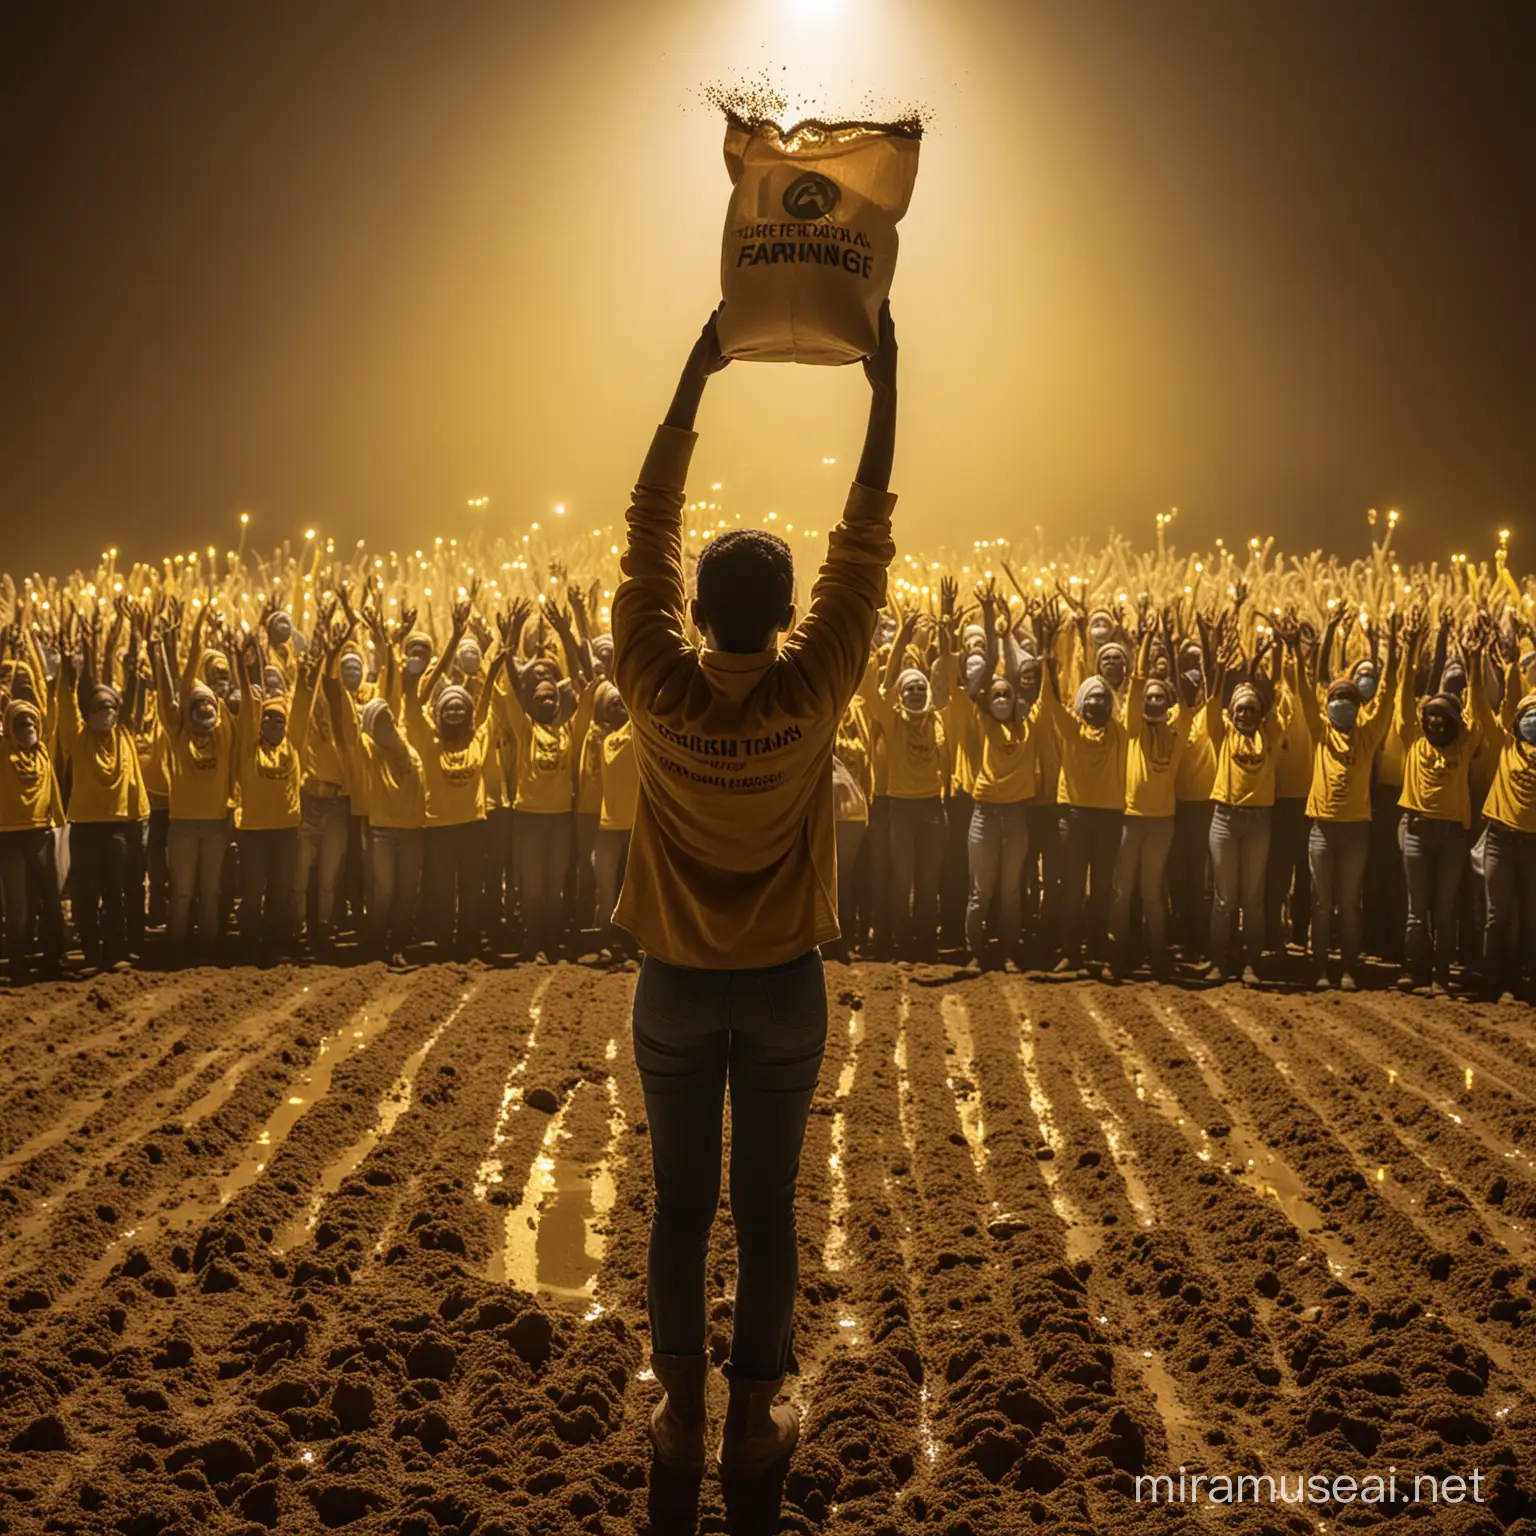 "Create an image where people are shown raising their hands with determination, facing a central stage illuminated by warm yellow lights. At the center stage stands a bag of chemical fertilizer, symbolizing agricultural practices. Surrounding the stage, people are holding bags of fertilizer, their right hands filled with soil, depicting their commitment to soil regeneration and sustainable farming practices amidst the presence of chemical alternatives."